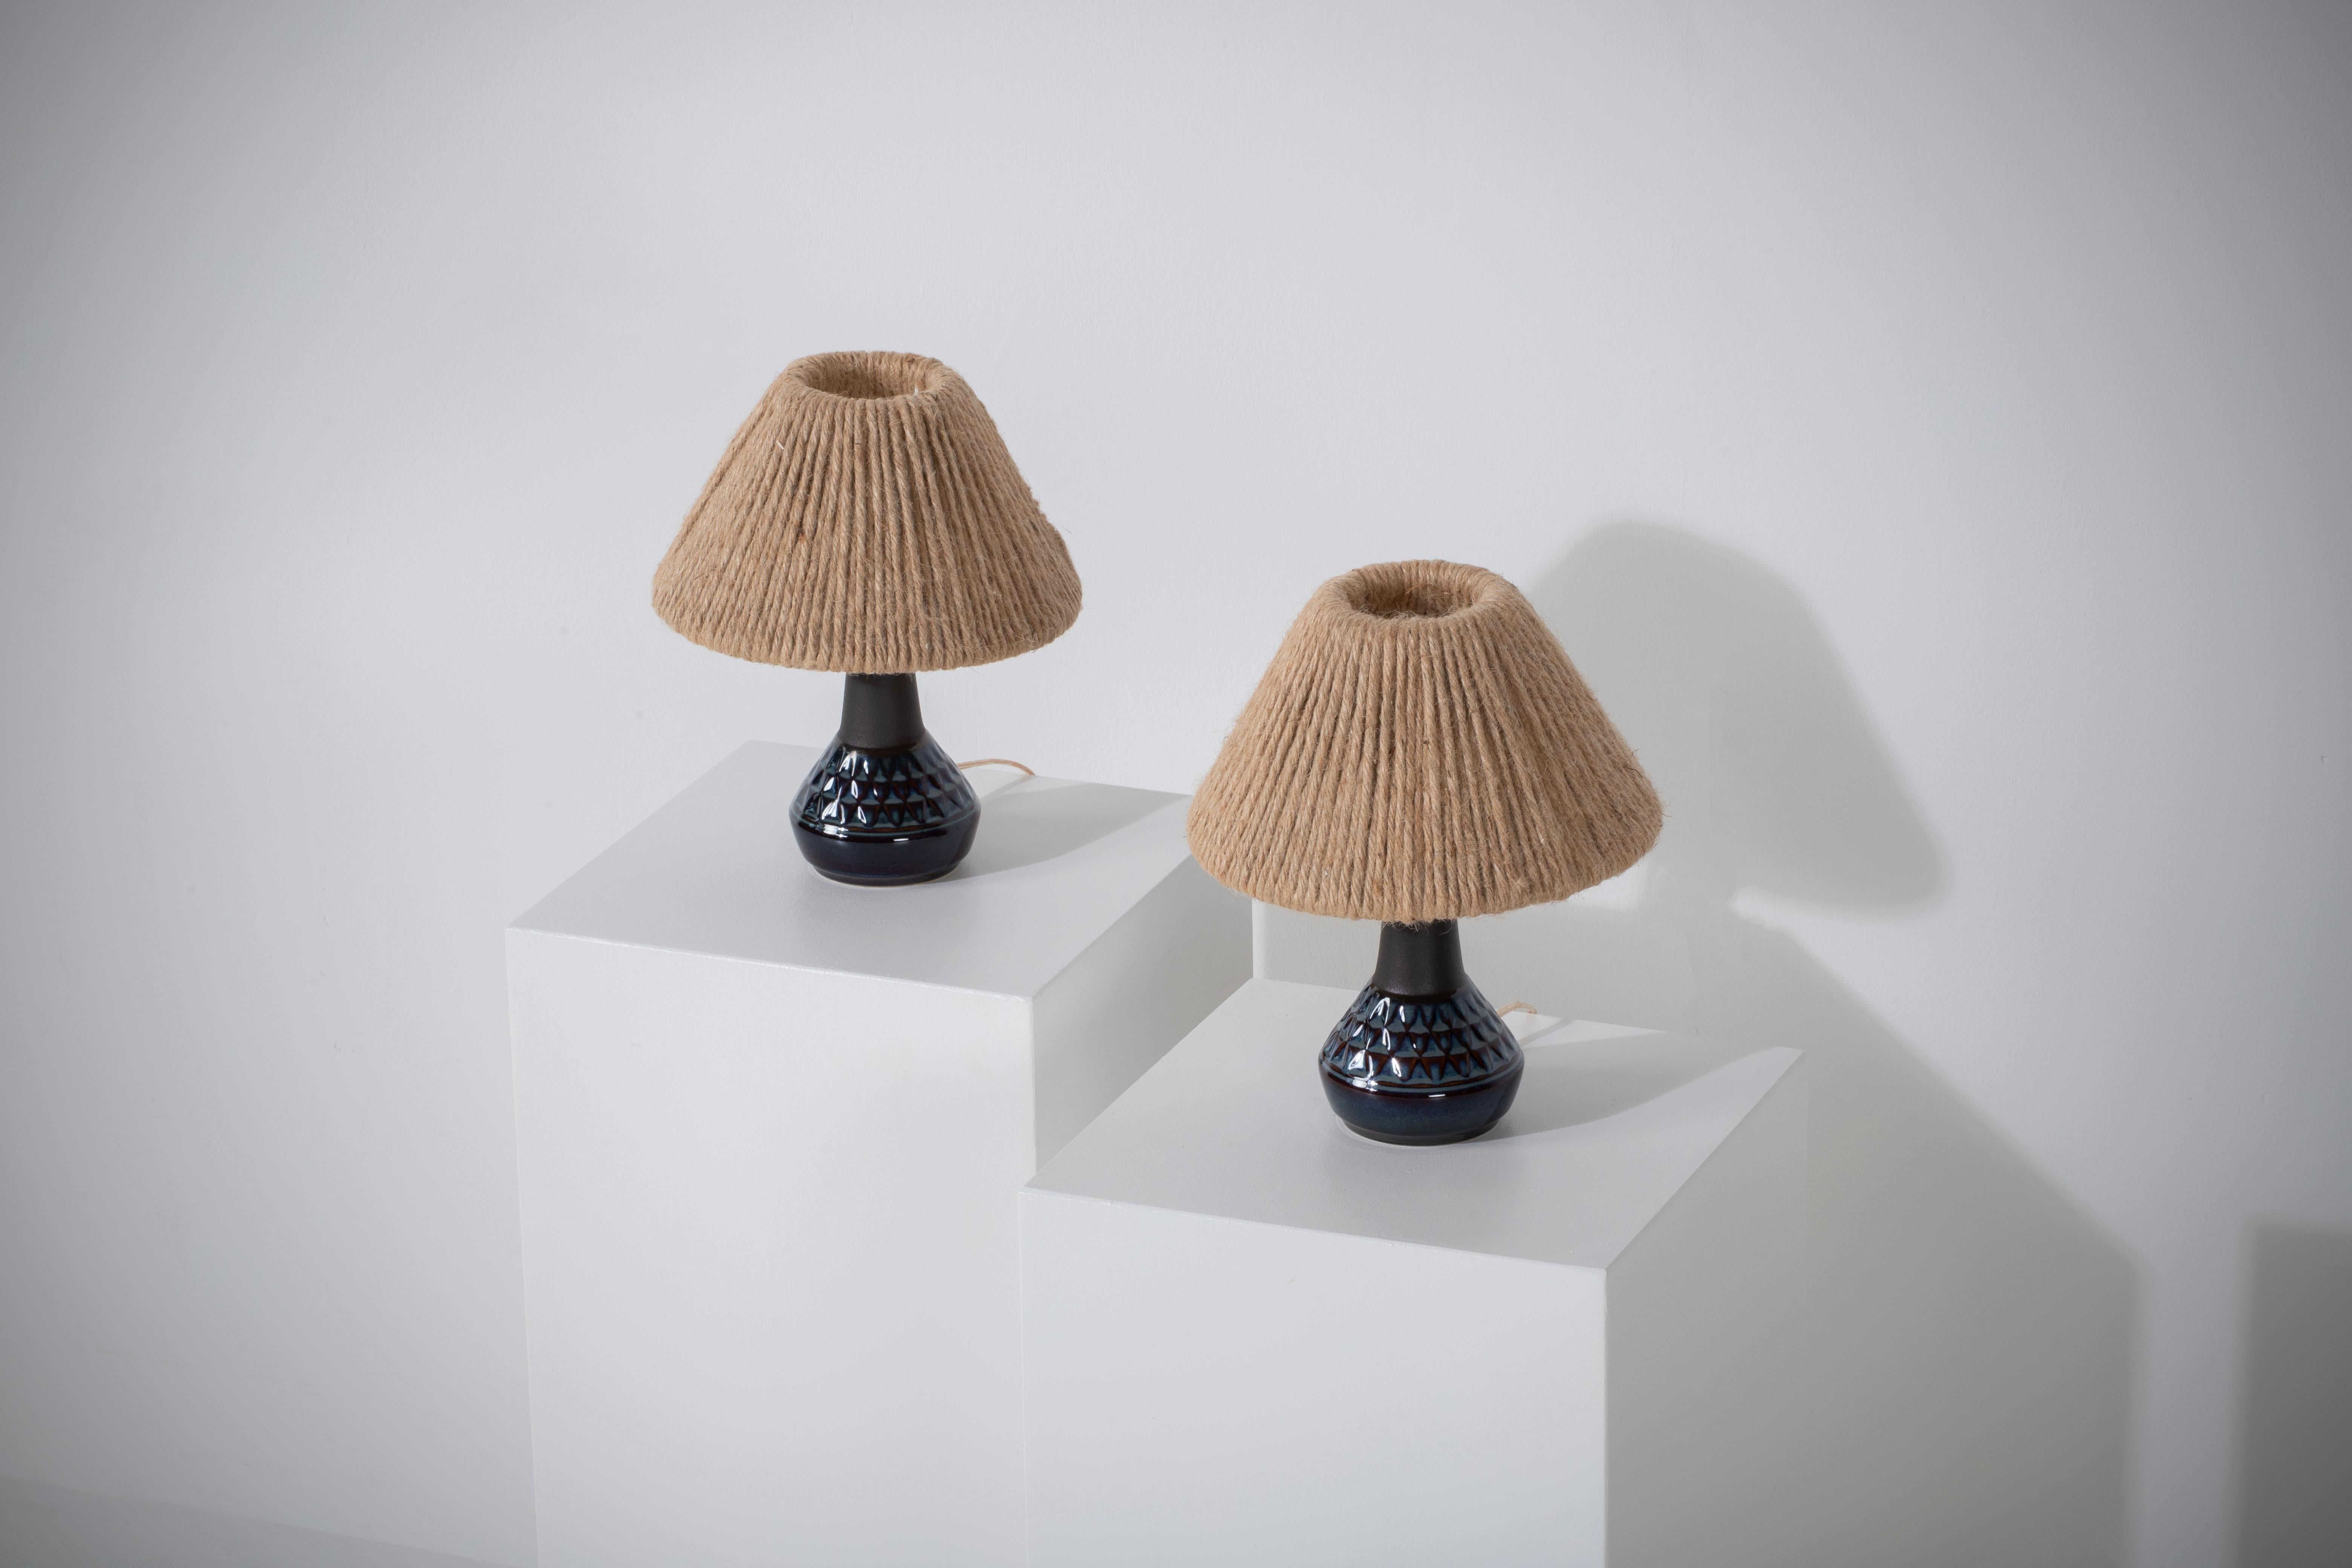 This is a pair of elegant table lamps designed by Einar Johansen and crafted by Søholm in Bornholm, Denmark, in the 1960s. 
The lamps are made of stoneware and feature a signature by the designer and the maker, including 